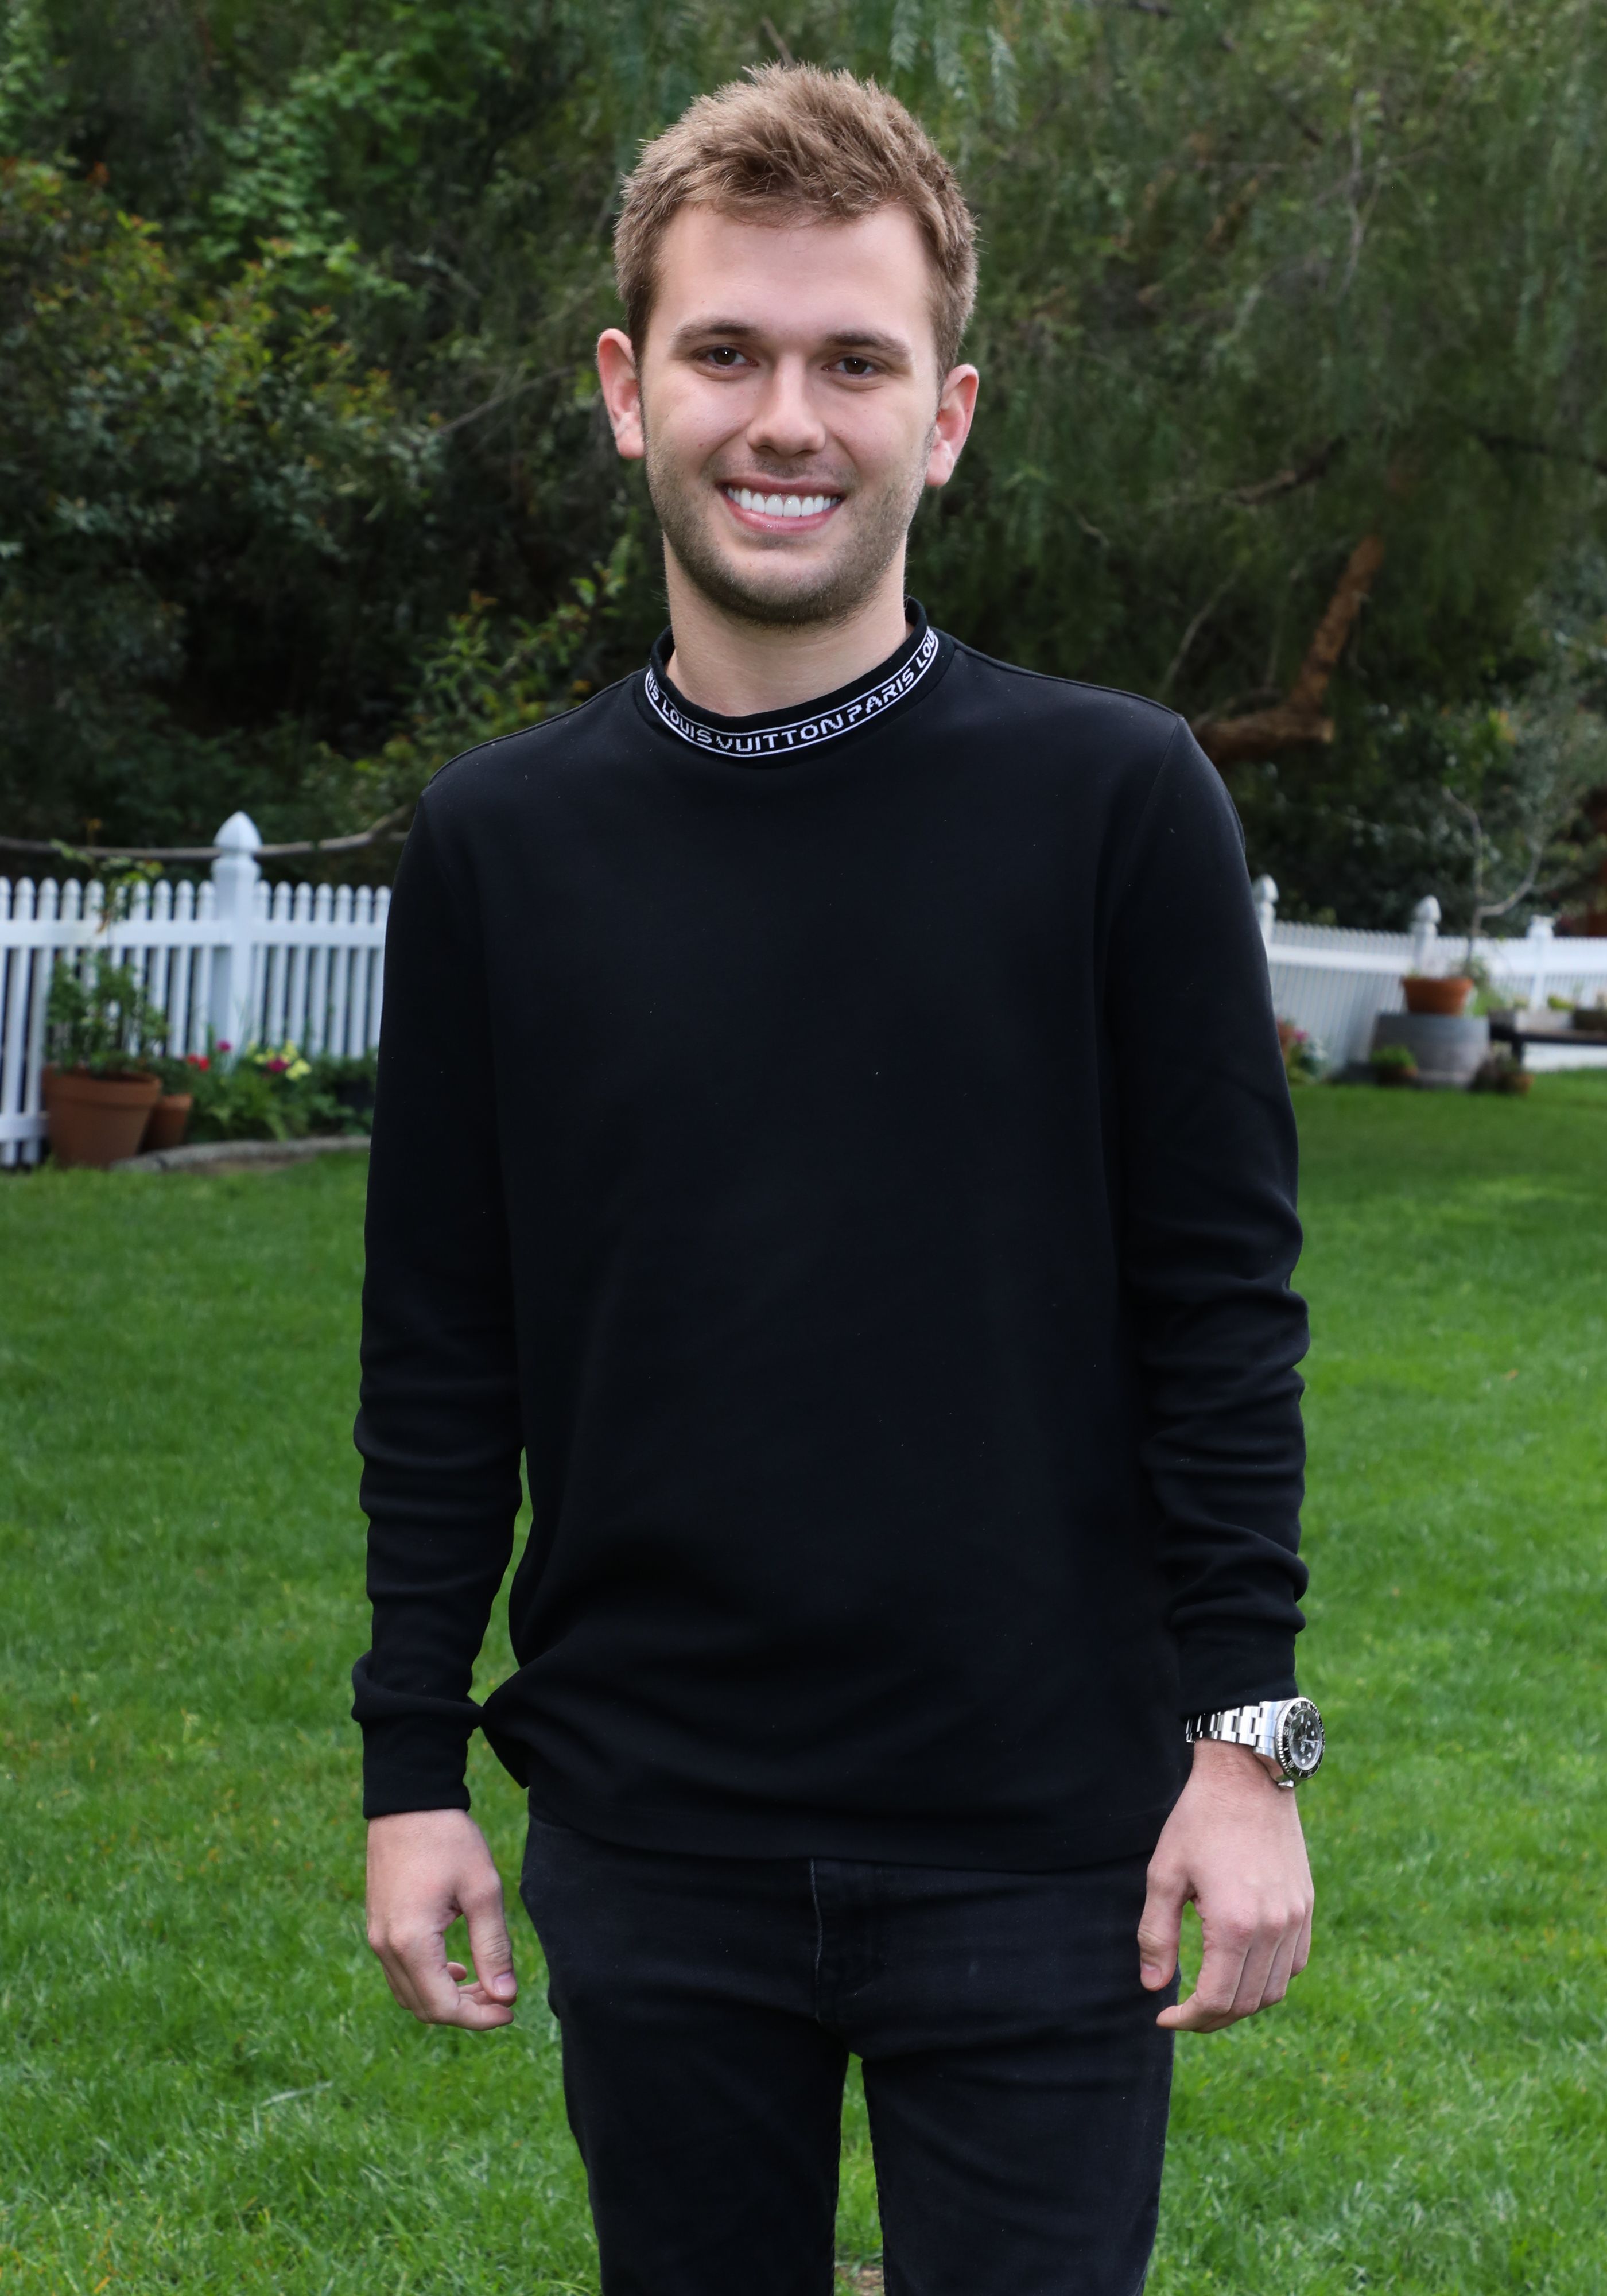 Chase Chrisley at Hallmark's "Home & Family" at Universal Studios Hollywood on March 27, 2019 in Universal City, California. | Source: Getty Images